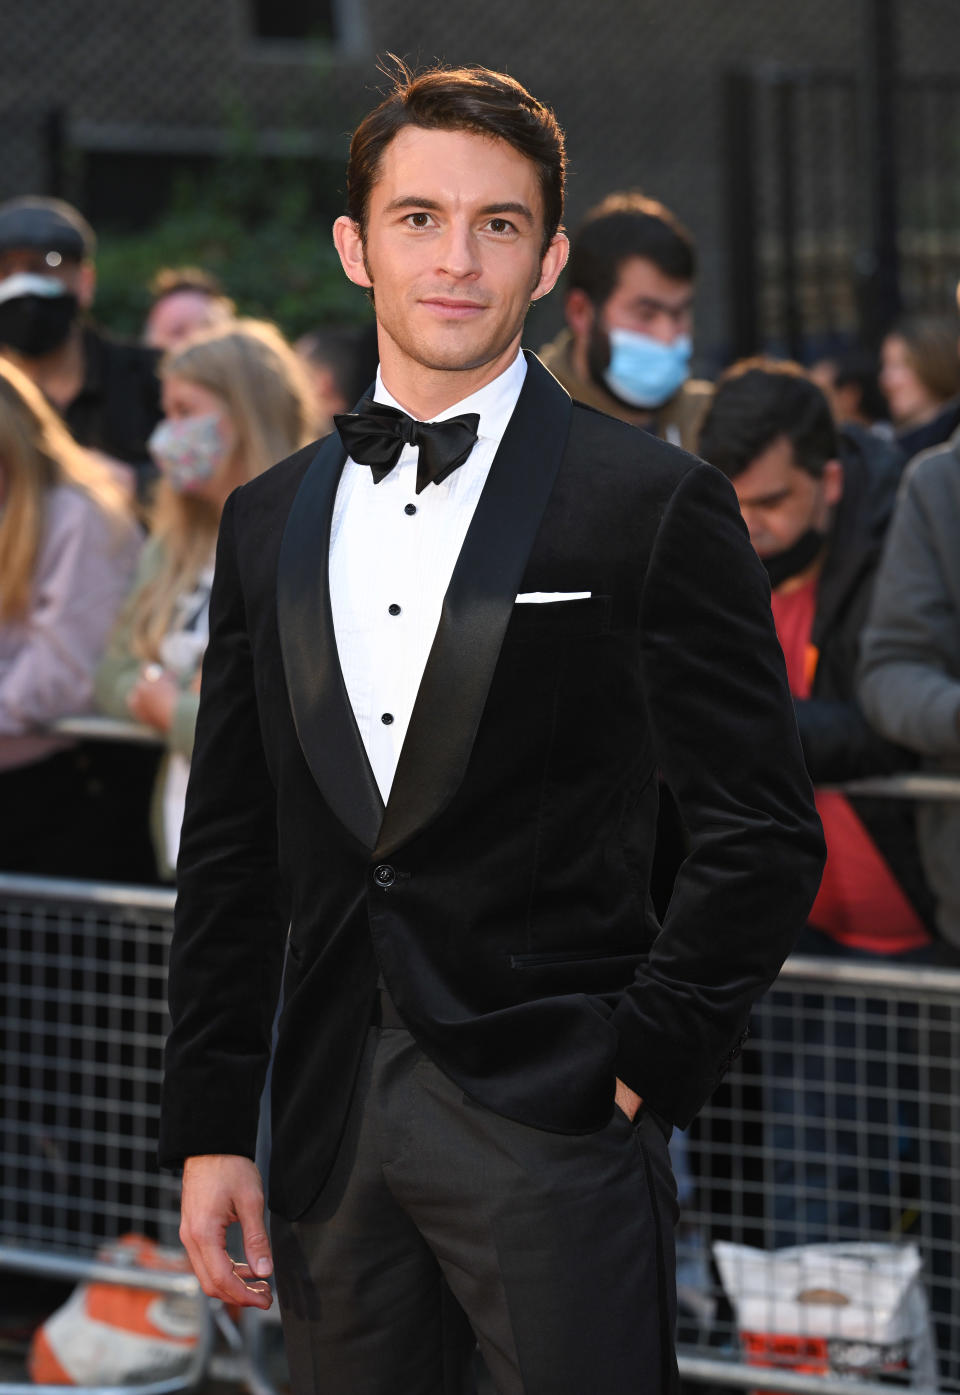 LONDON, ENGLAND - SEPTEMBER 01: Jonathan Bailey attends the GQ Men Of The Year Awards 2021 at Tate Modern on September 01, 2021 in London, England. (Photo by Karwai Tang/WireImage)